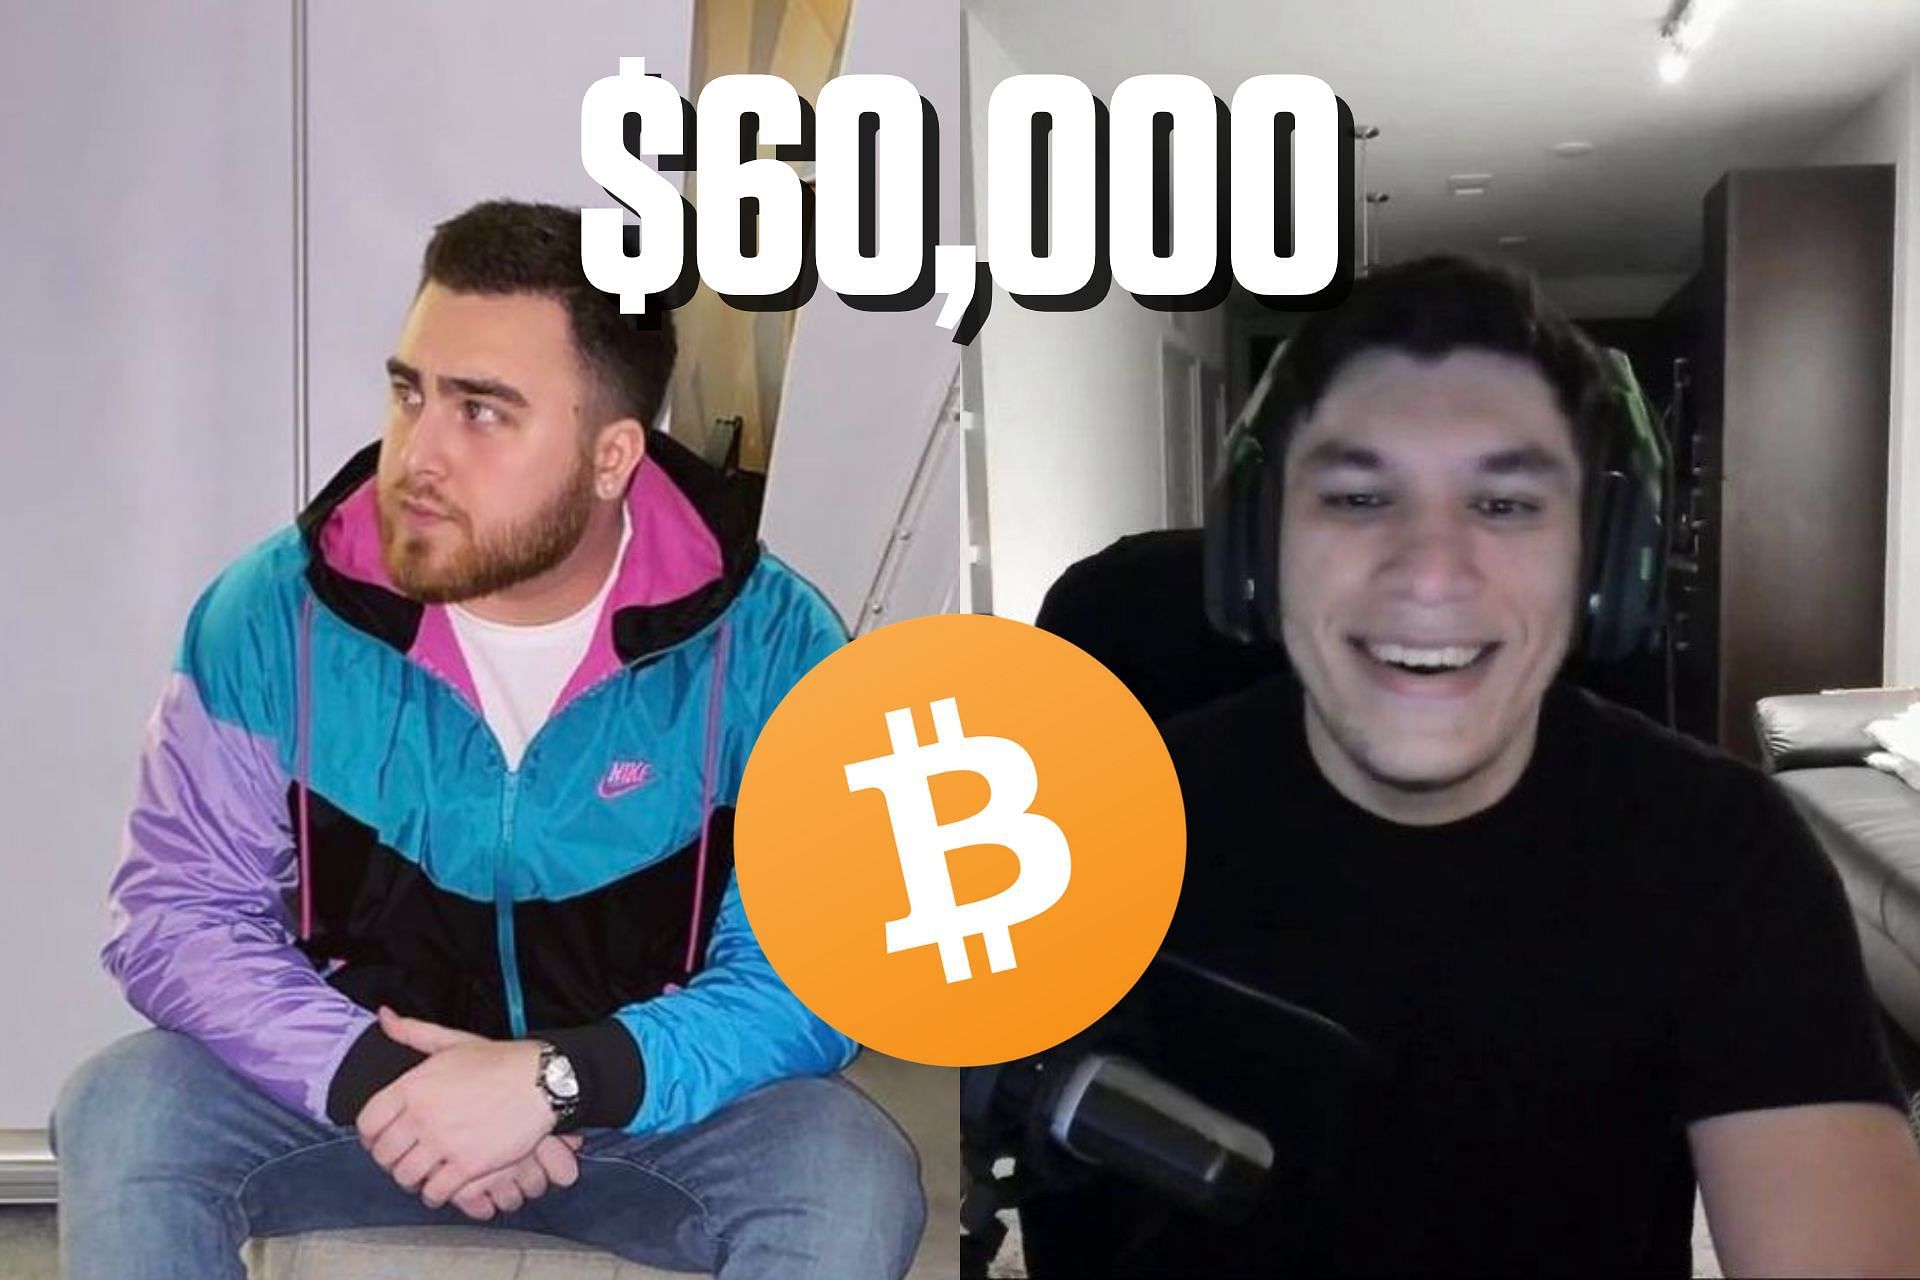 Trainwreck gives LosPollosTV $60,000 to share between him, his dad, and ...